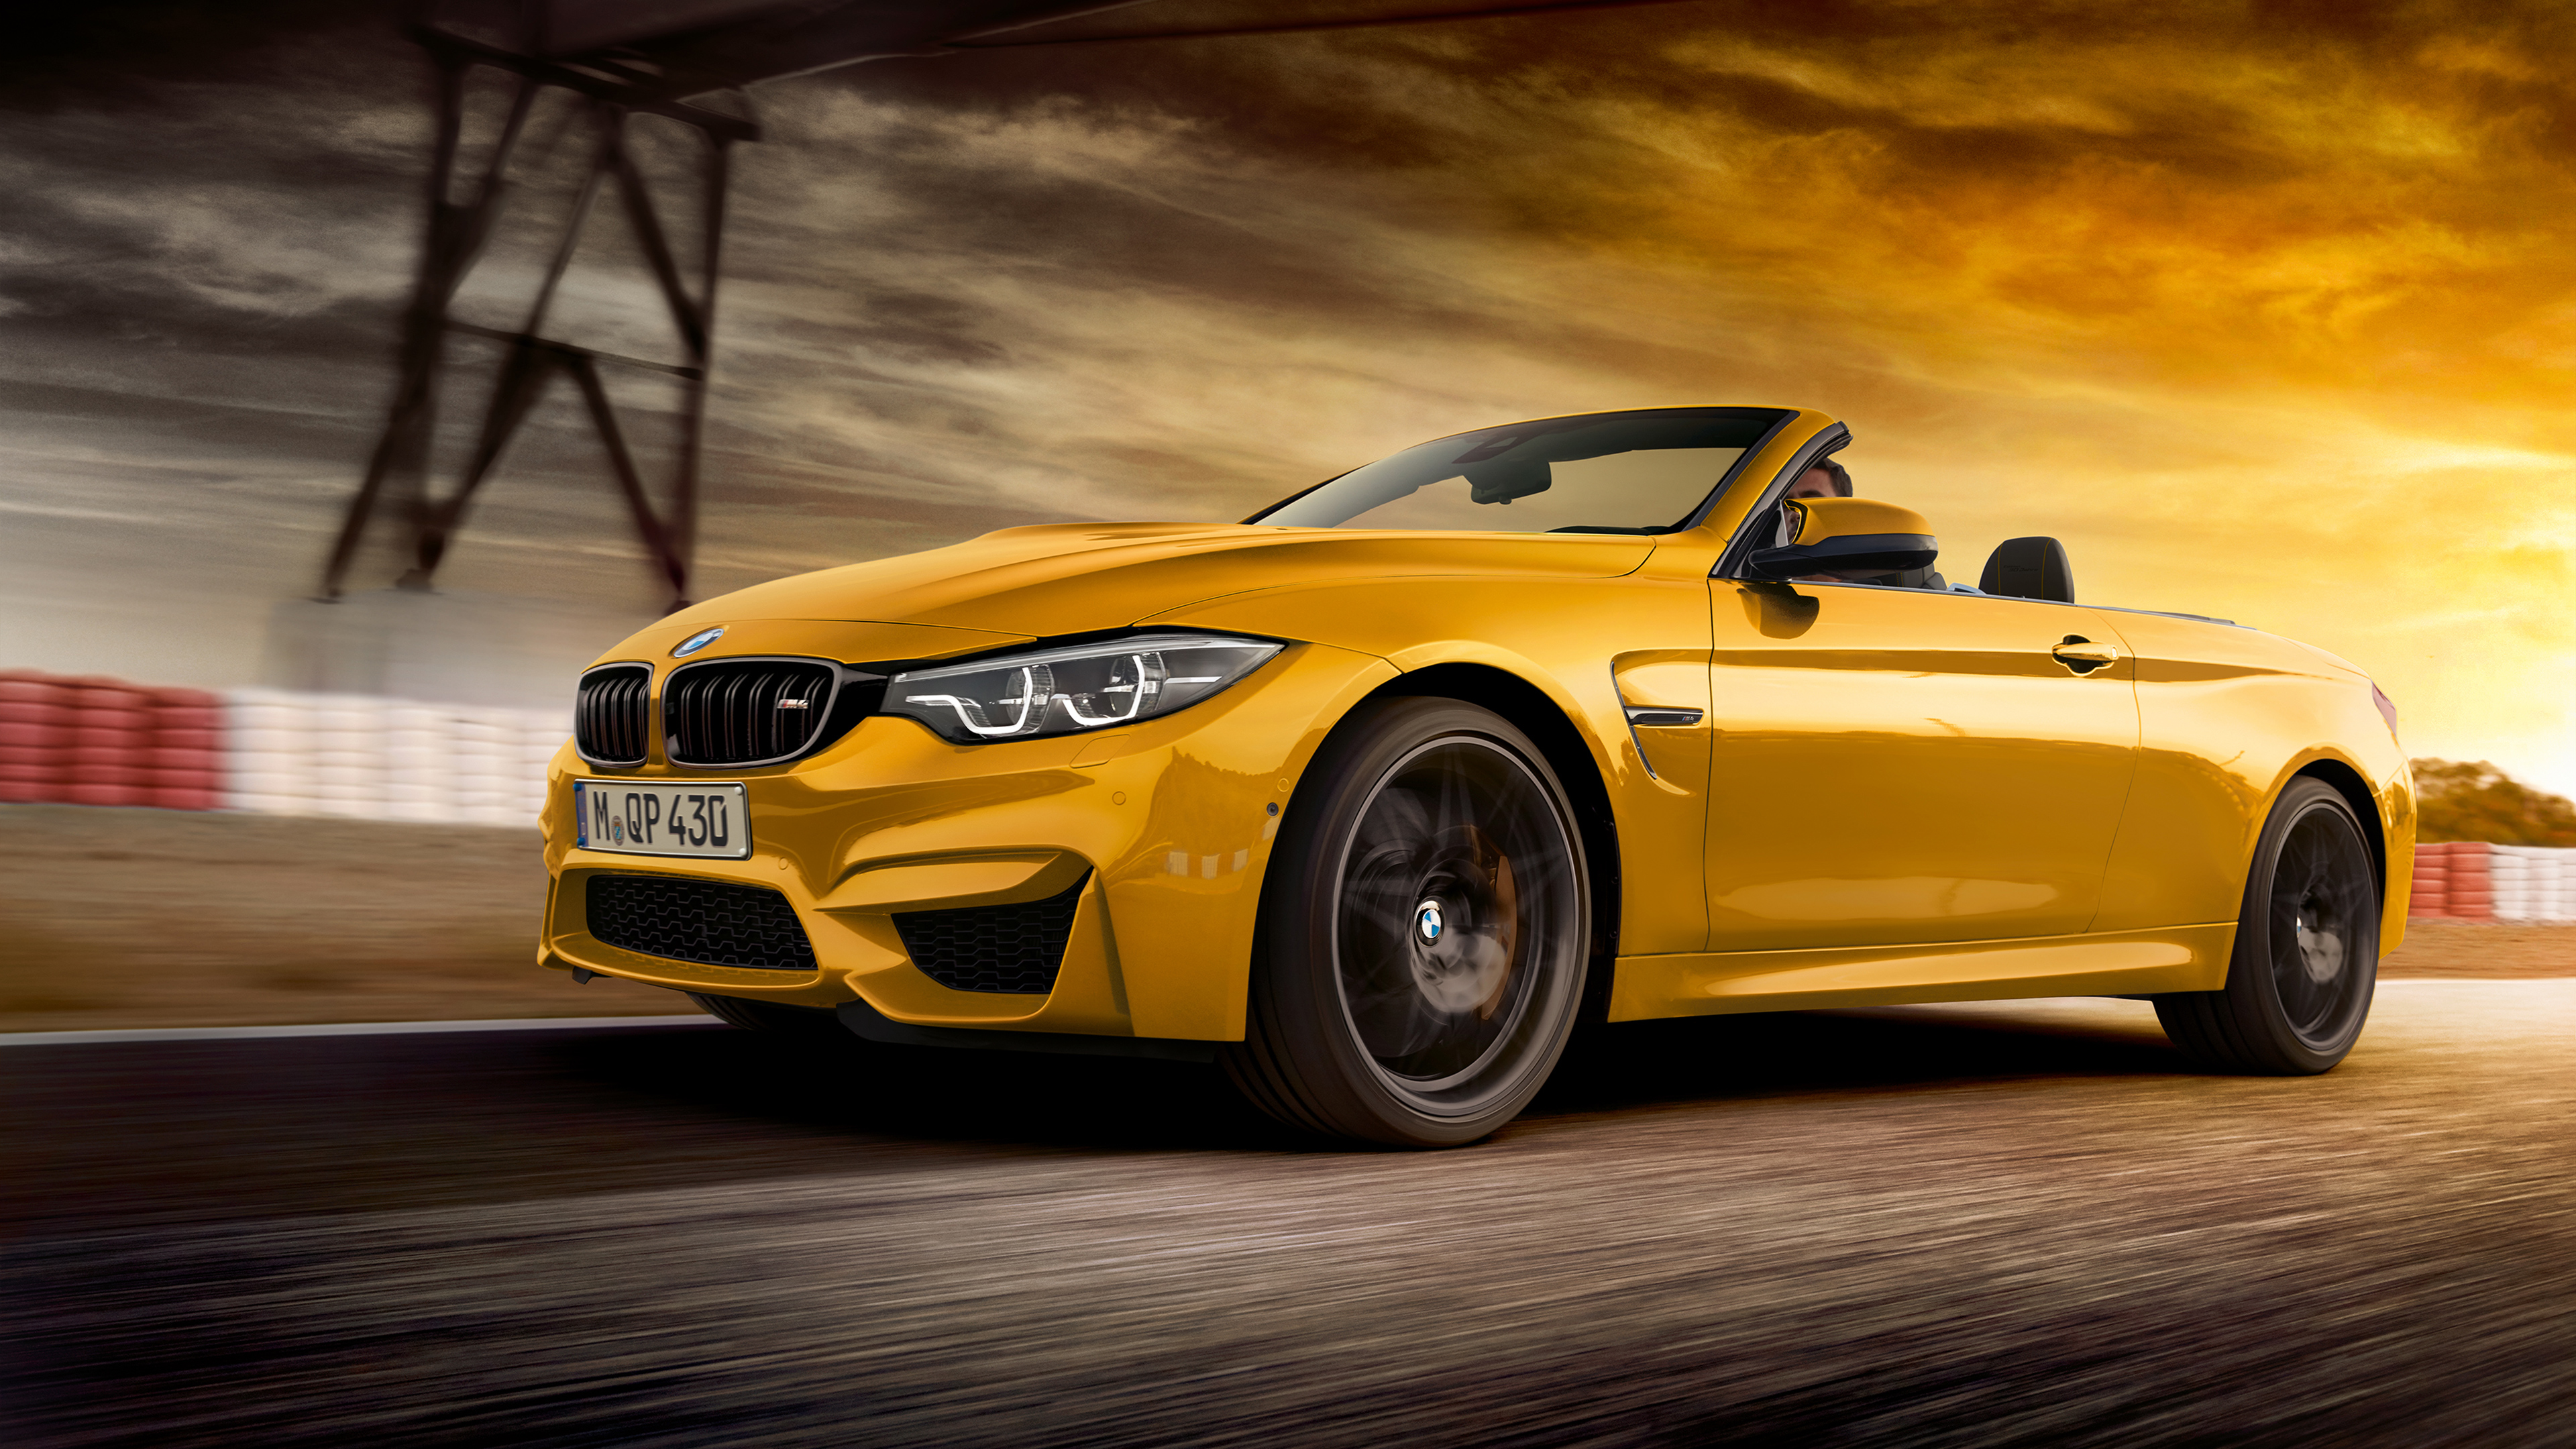 2018 BMW M4 Convertible 30 Jahre Special Edition 4K 2 Wallpaper | HD ...
